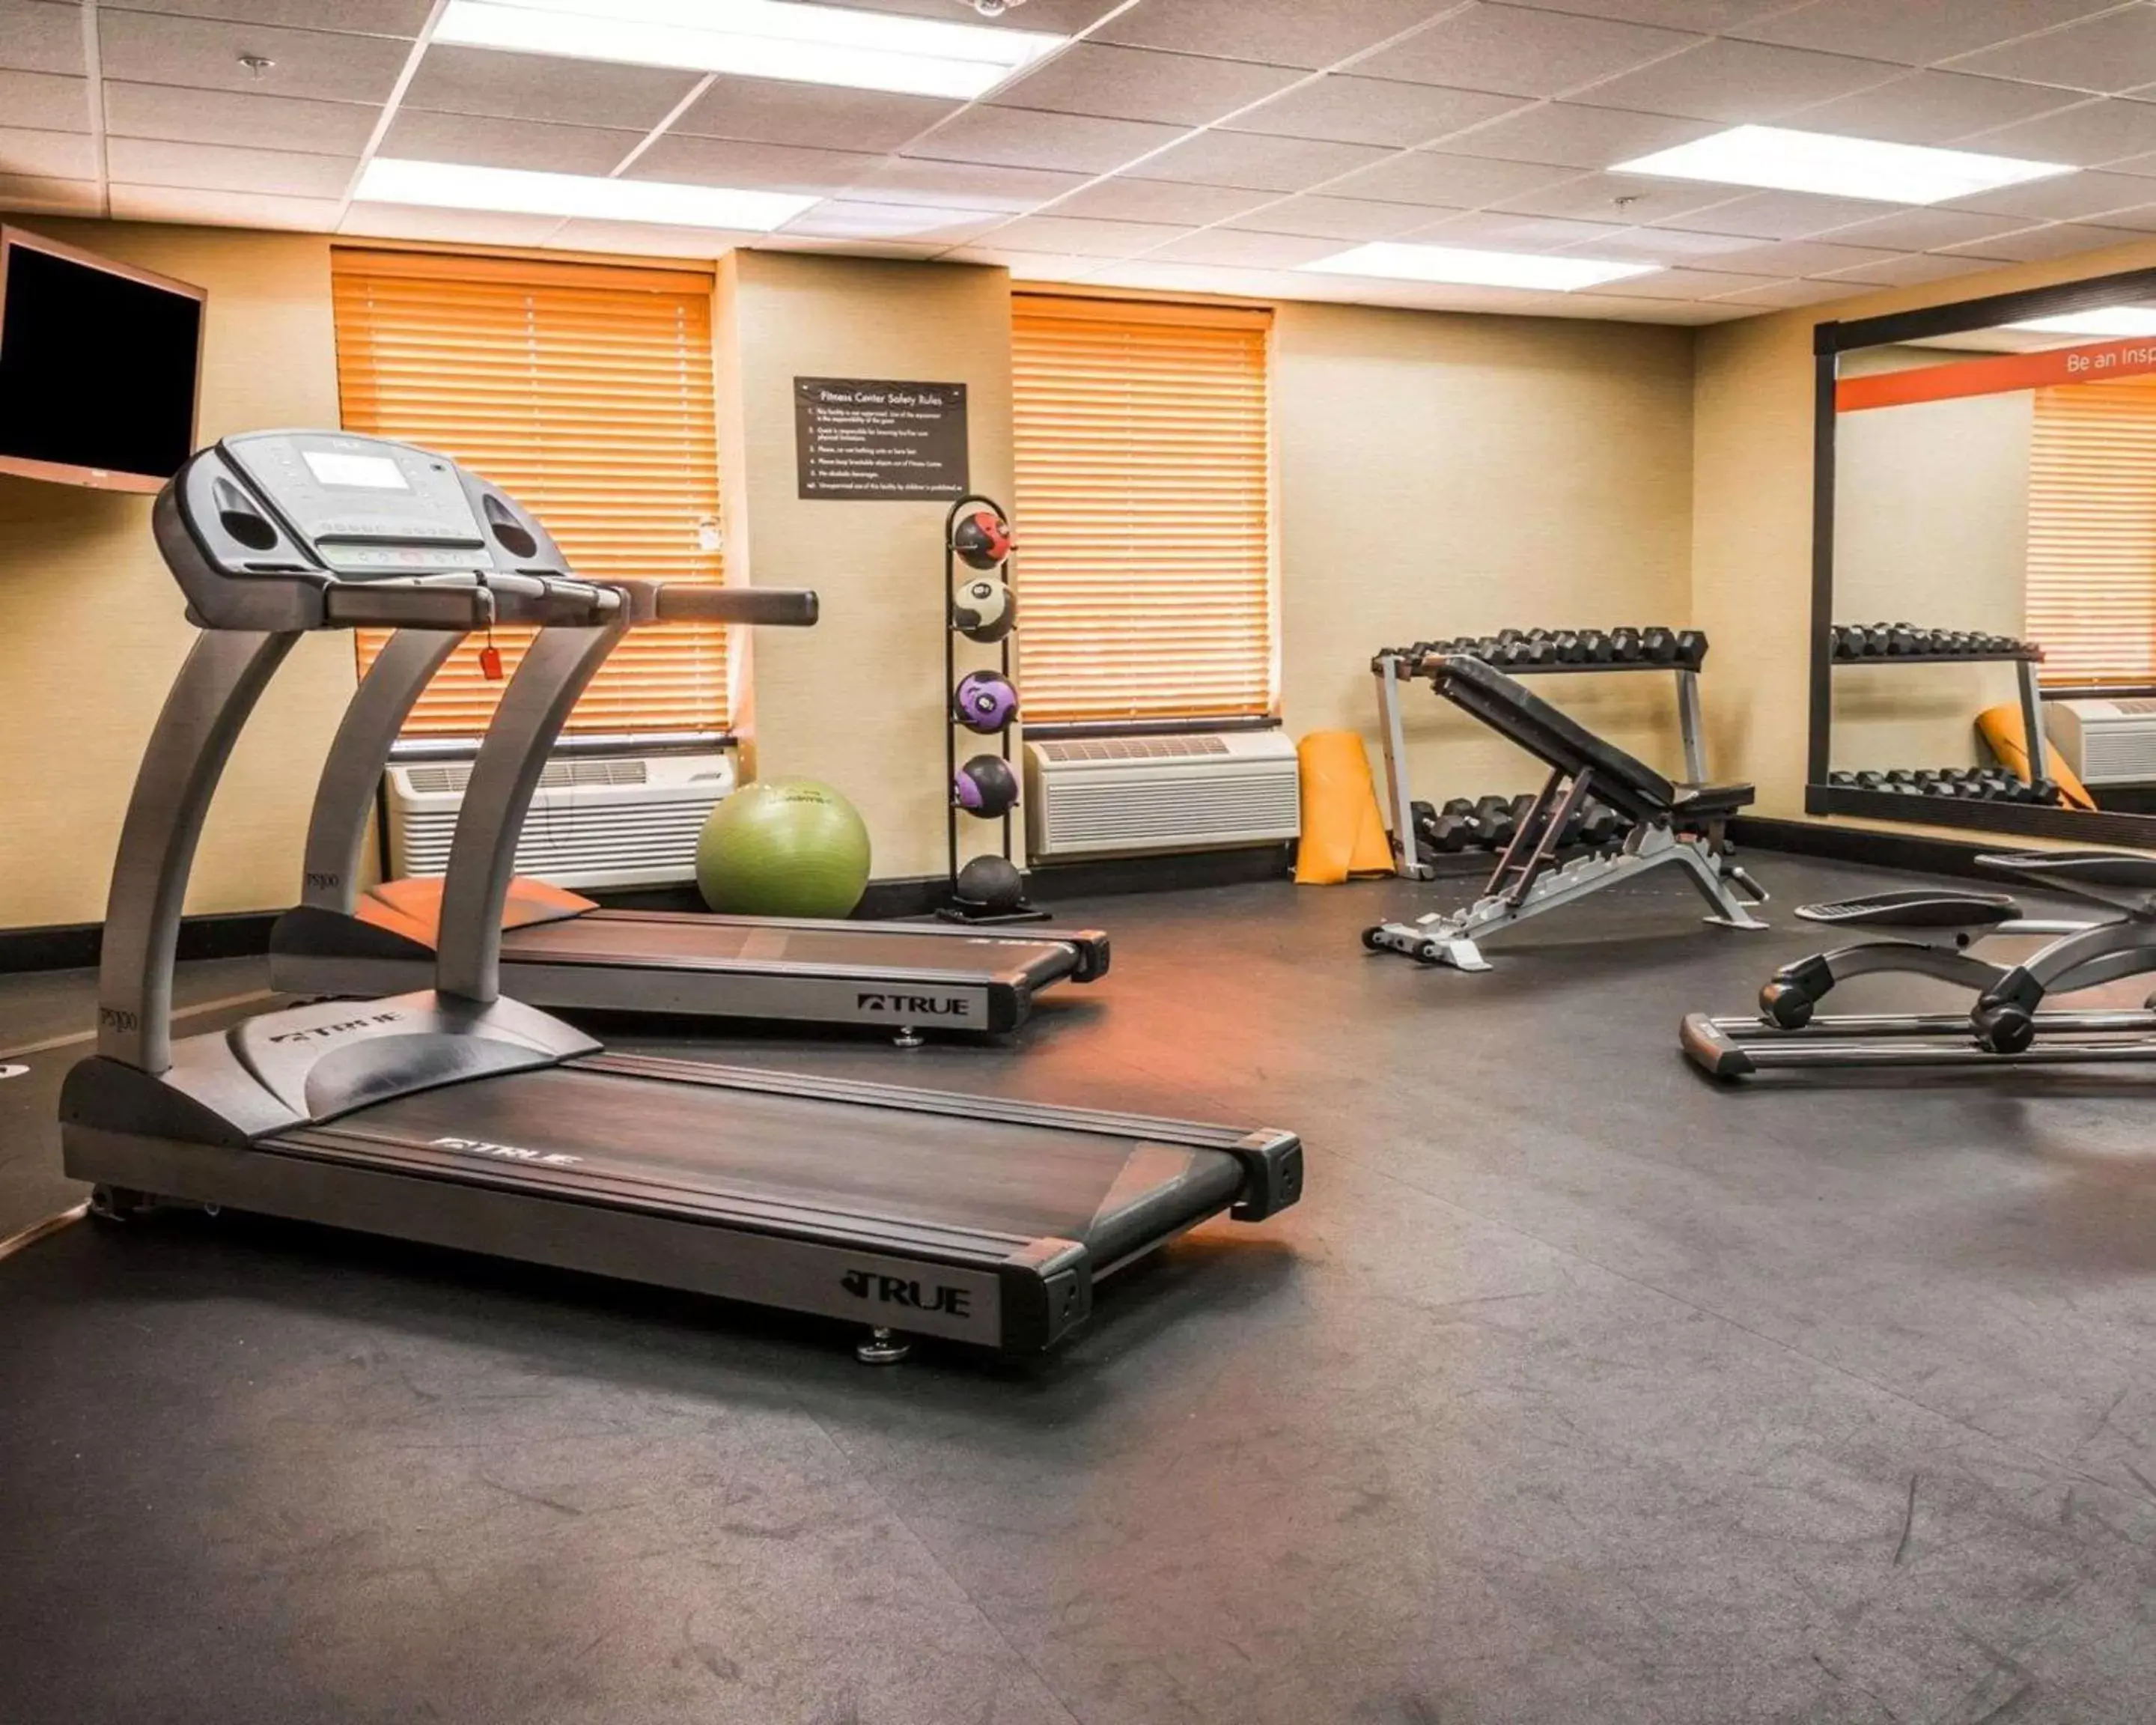 Fitness centre/facilities, Fitness Center/Facilities in Comfort Inn Plymouth